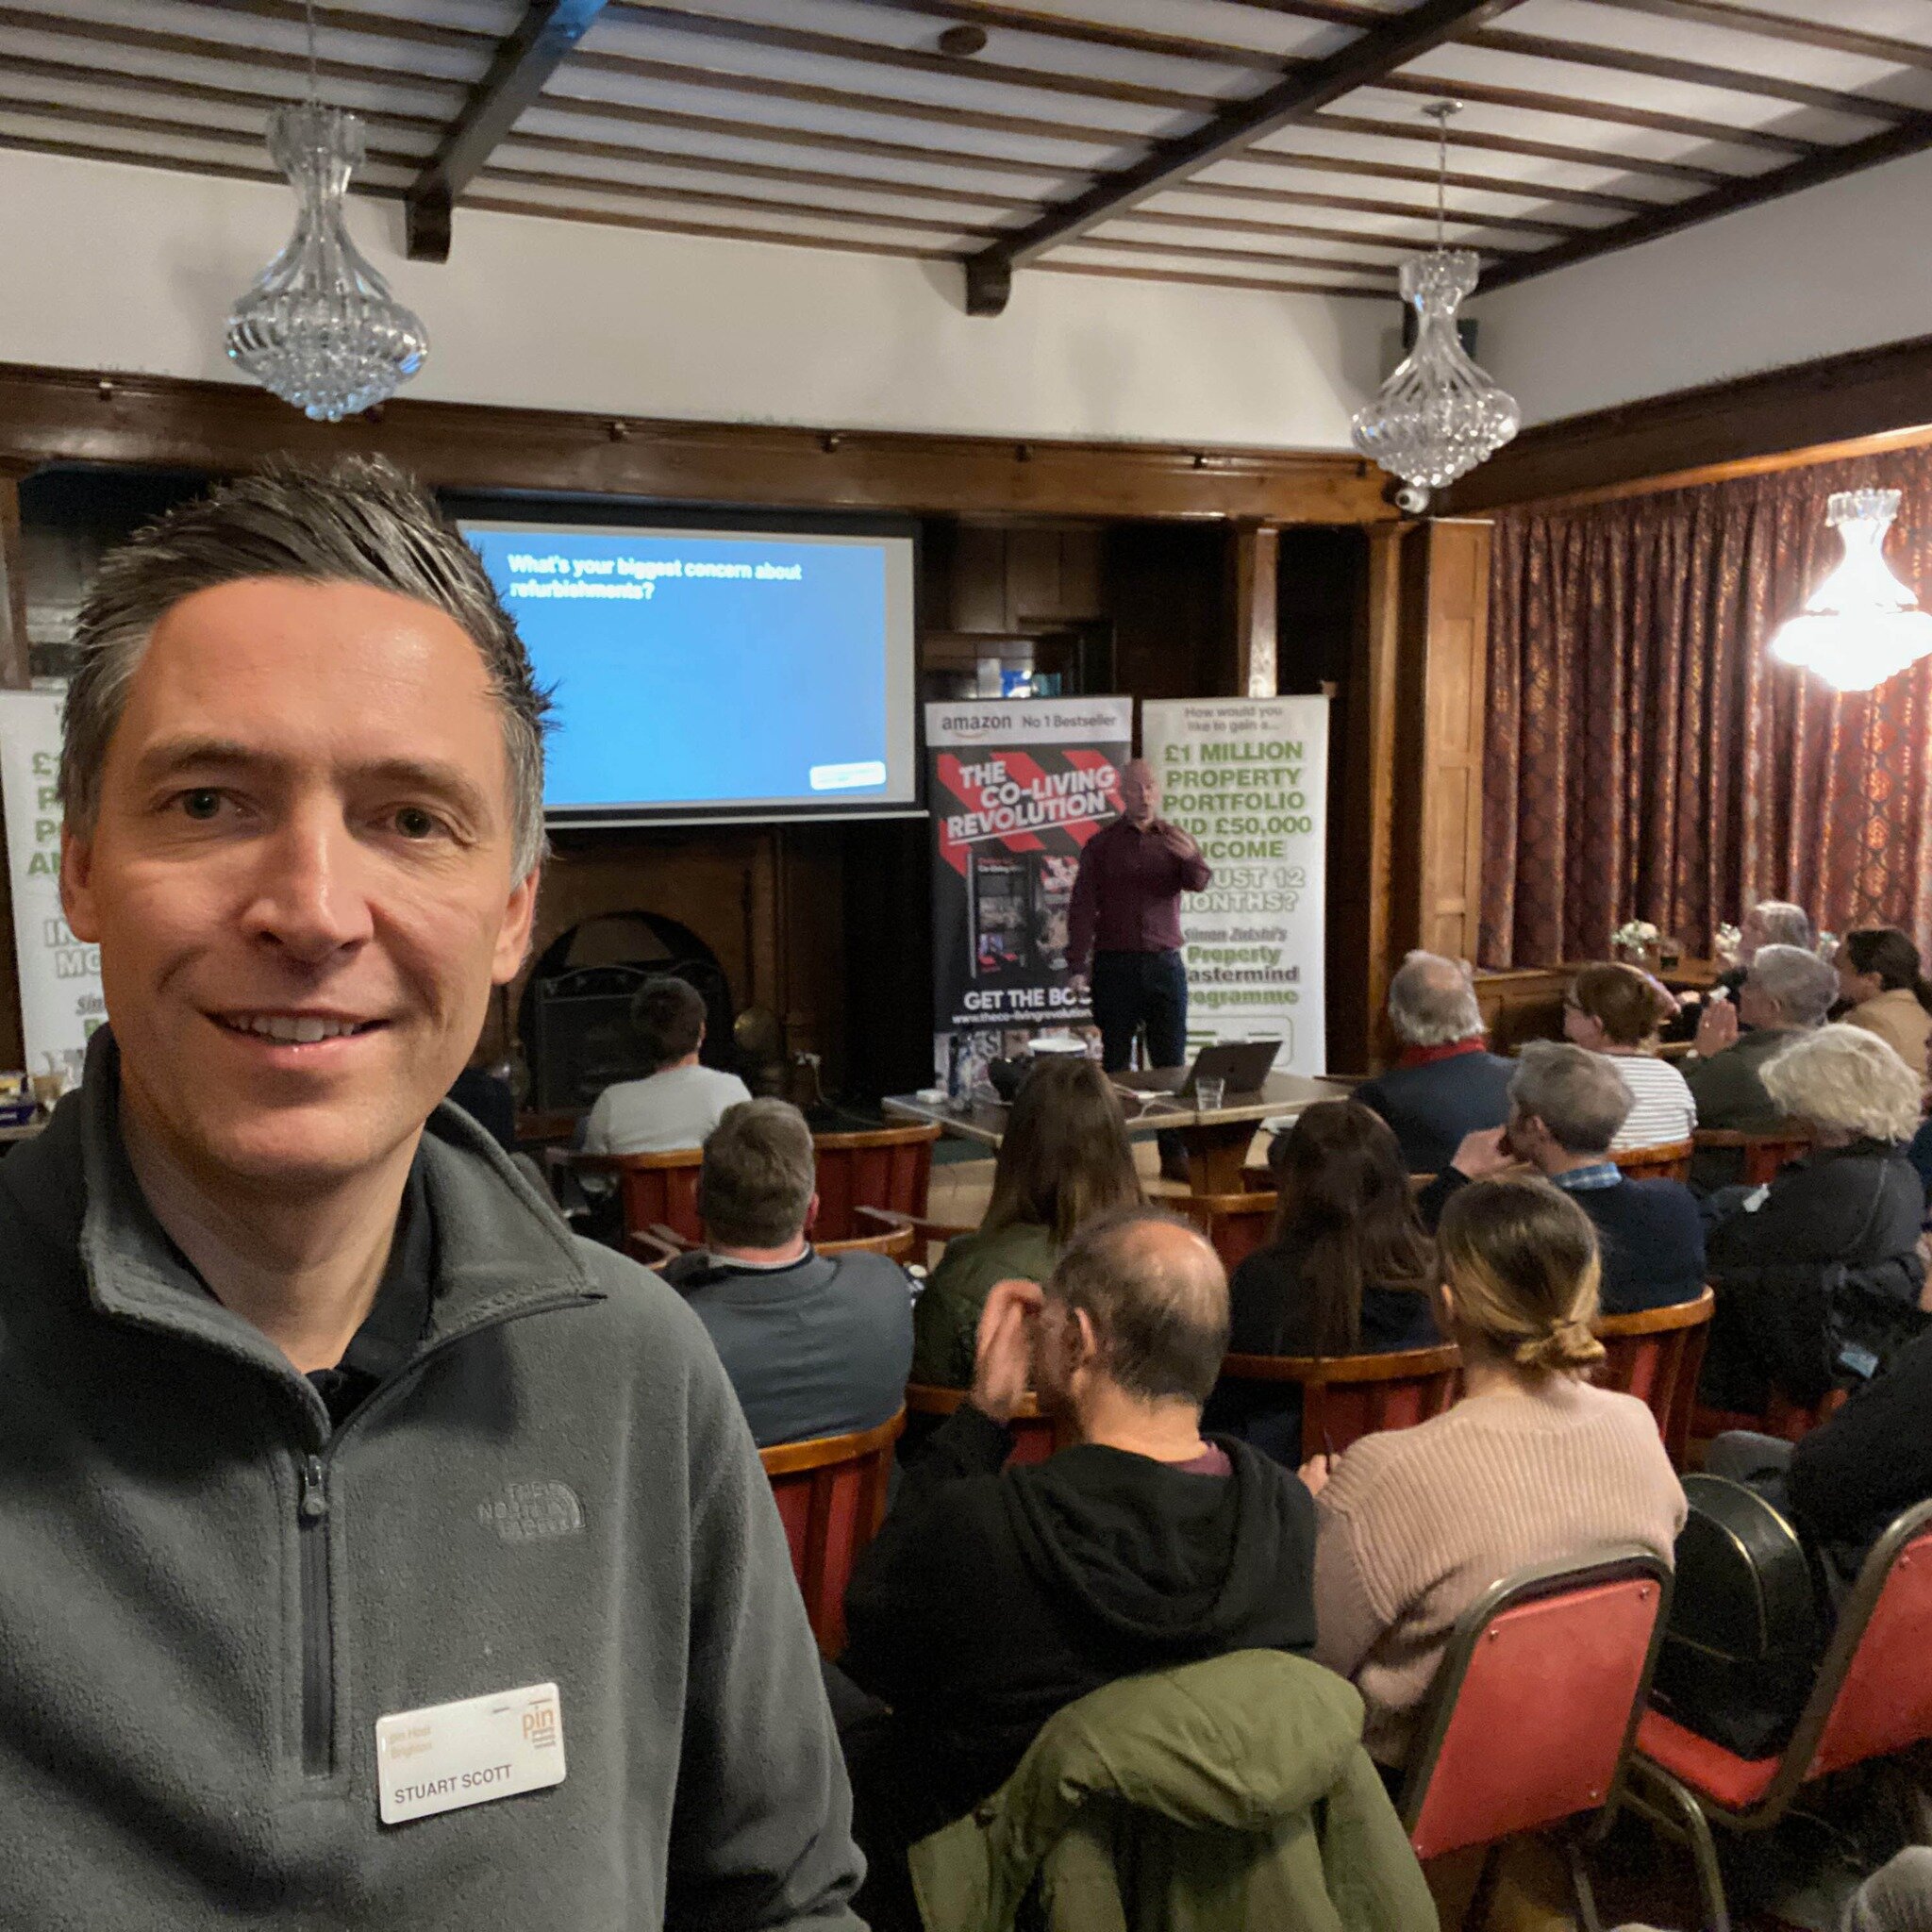 Another FULL HOUSE for Brighton pin property networking event. Come and join us at our next event Thu 18th May.

I am the host of Brighton pin networking event and we meet on the third Thursday of the month at East Brighton Golf Club. Each month we f